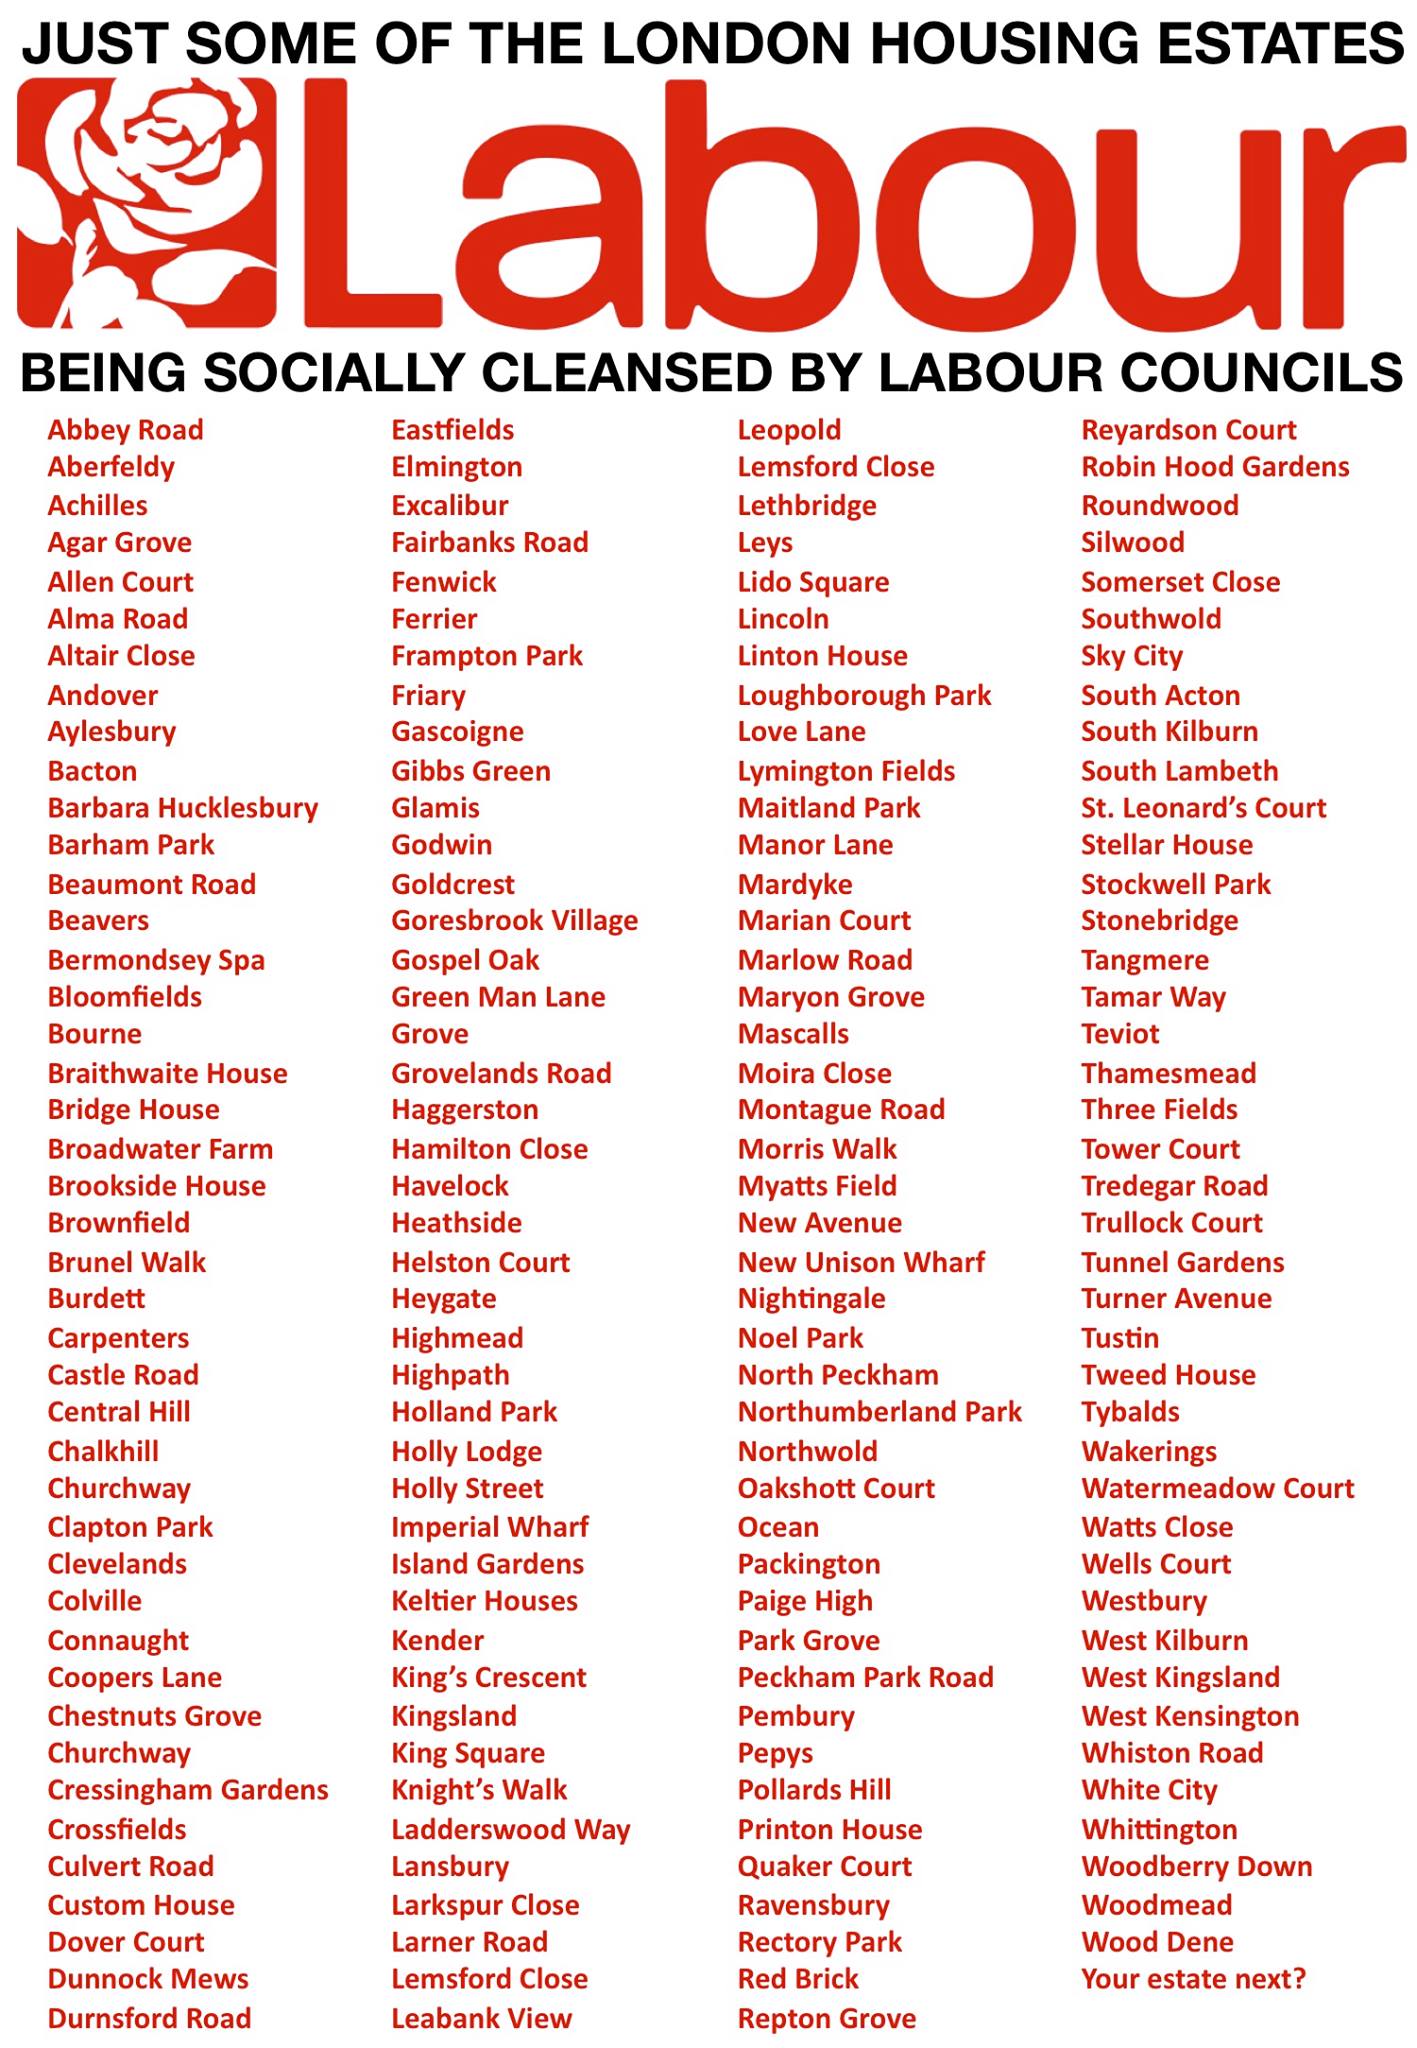 Architects for Social Housing's latest list of council estates in Labour boroughs that are threatened with destruction.